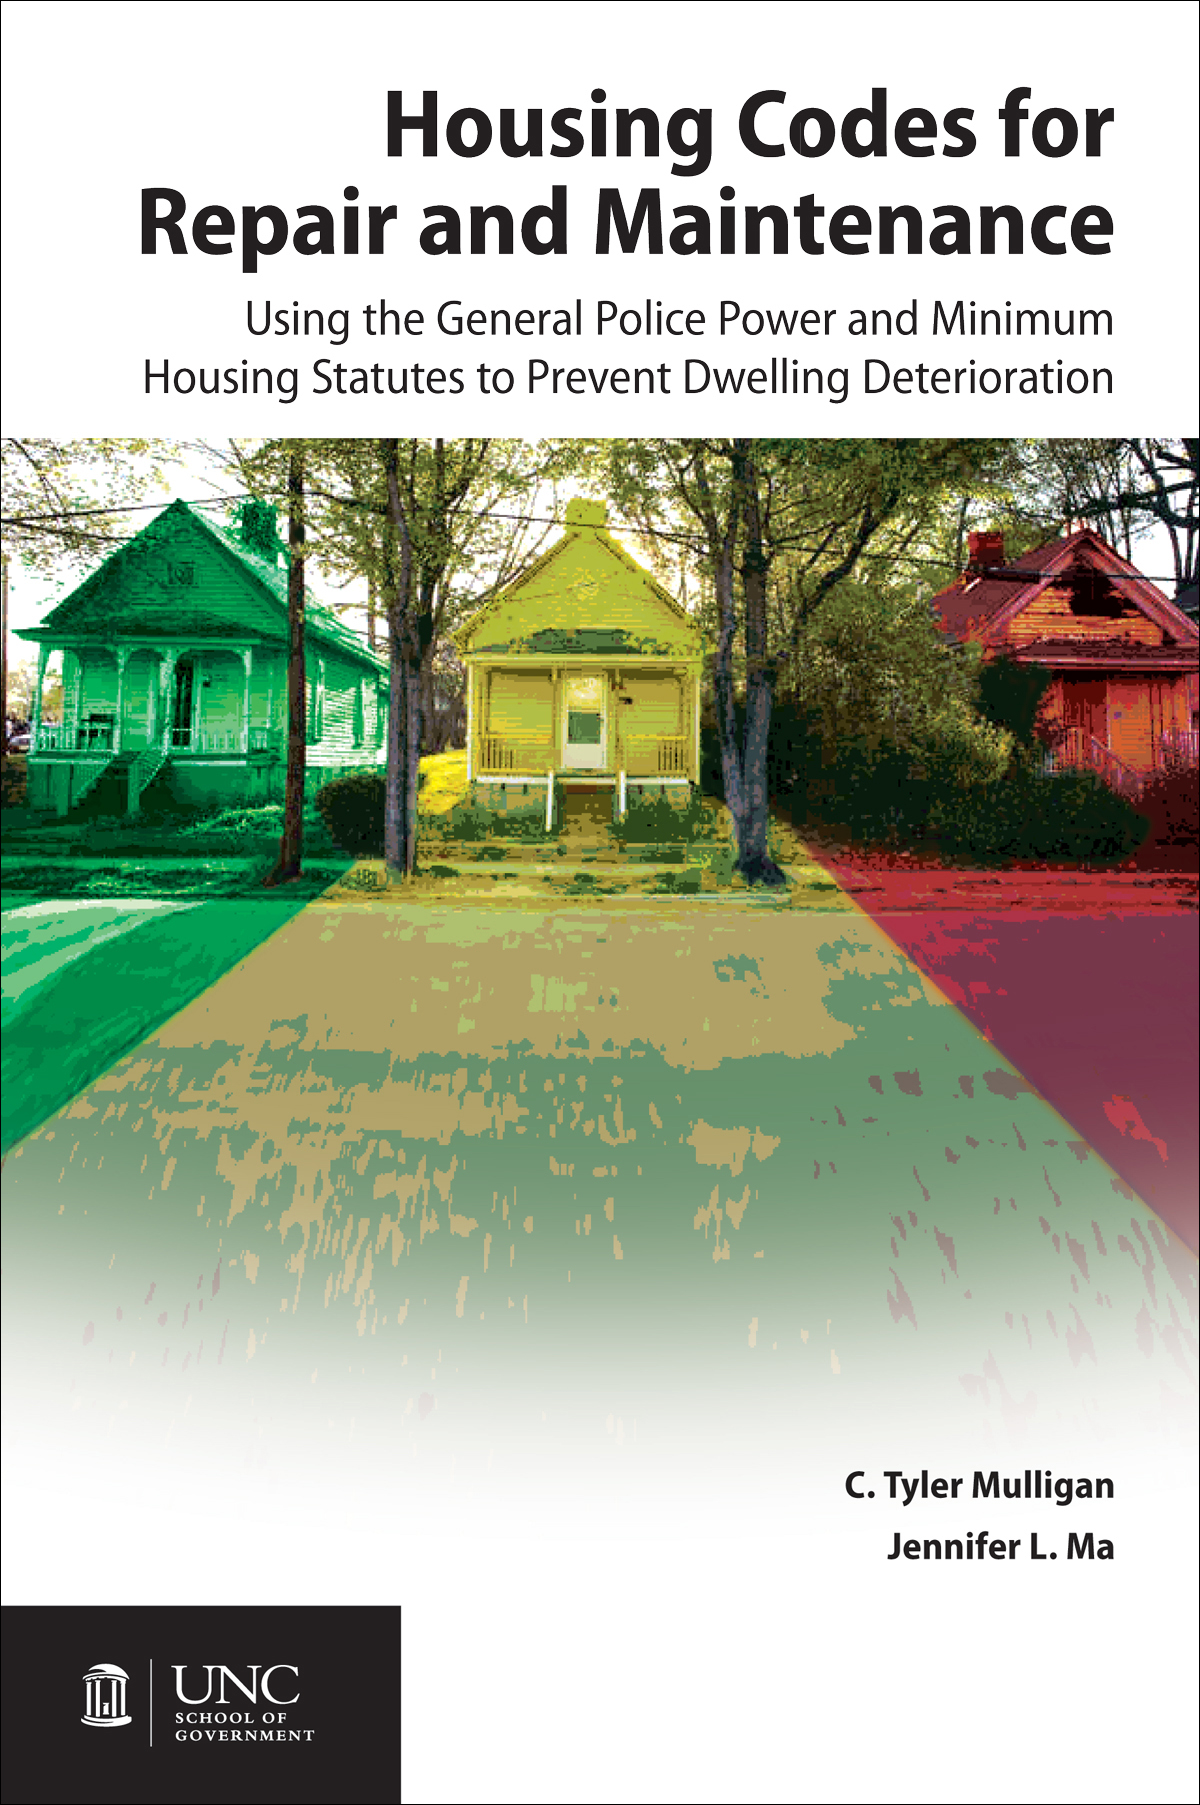 Housing Codes for Repair and Maintenance: Using the General Police Power and Minimum Housing Statutes to Prevent Dwelling Deterioration: Package of Hard Copy and PDF Editions